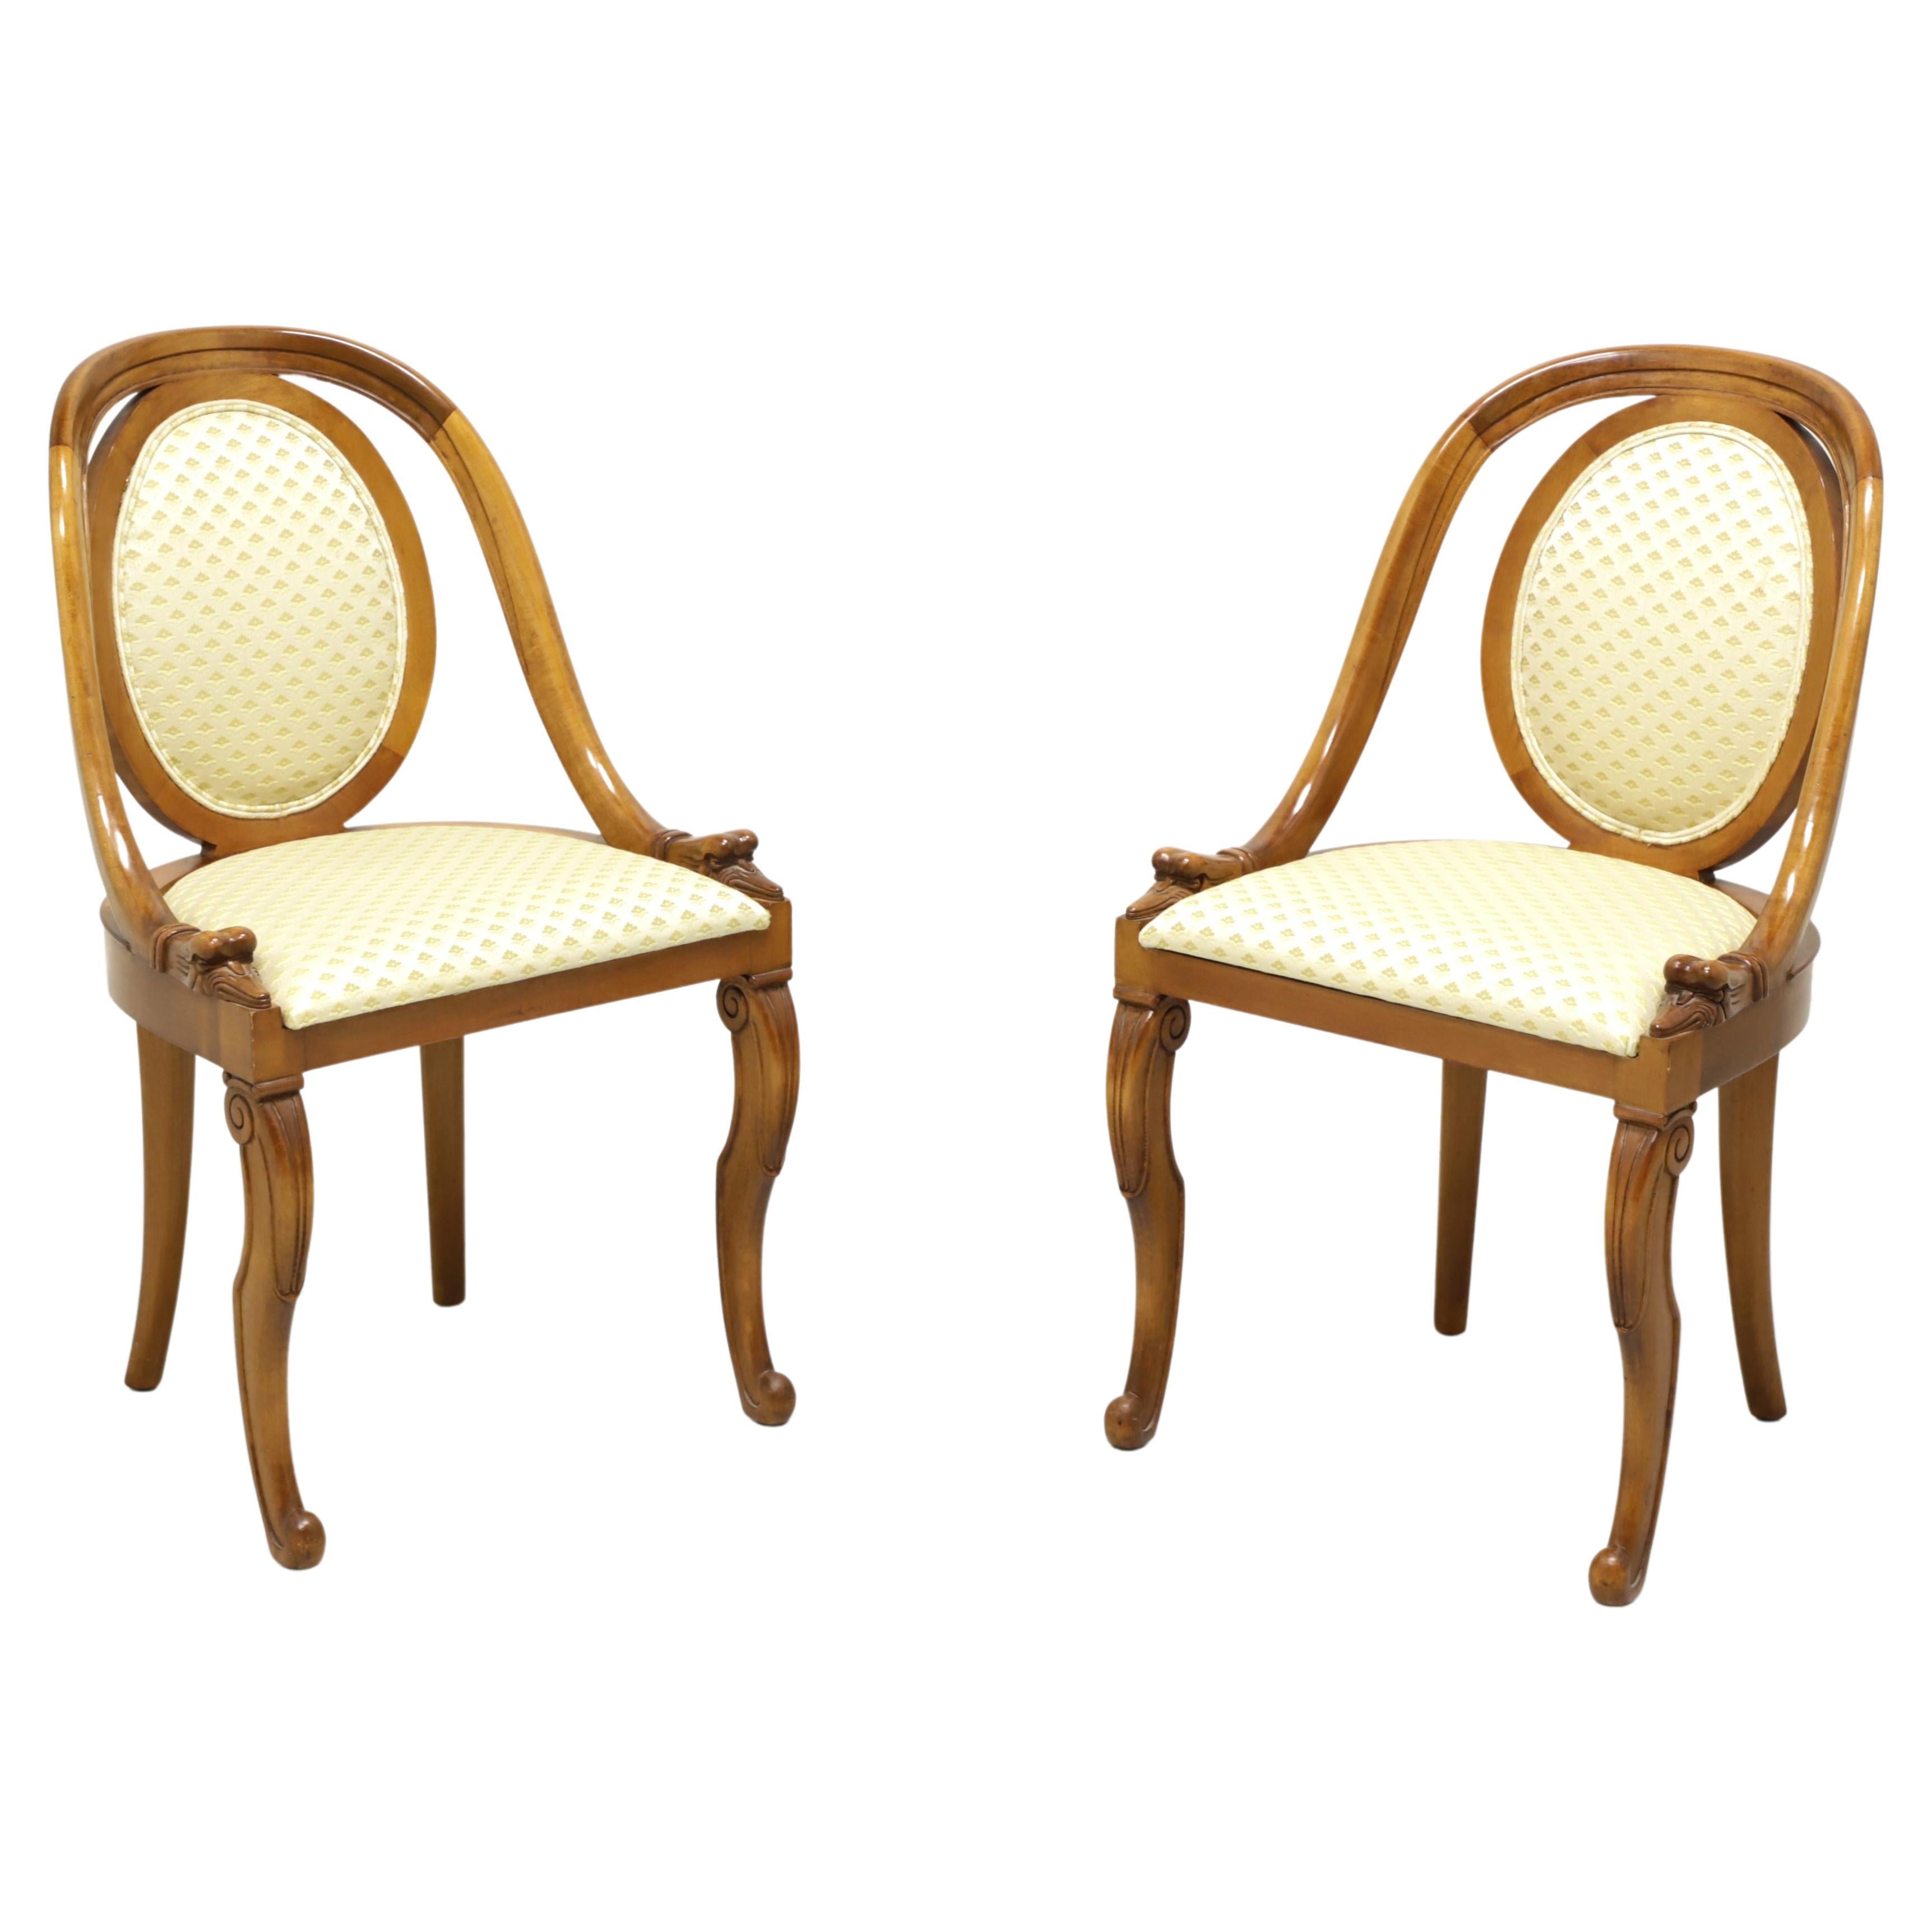 1920s French Art Deco Goosehead Dining Chairs - Pair